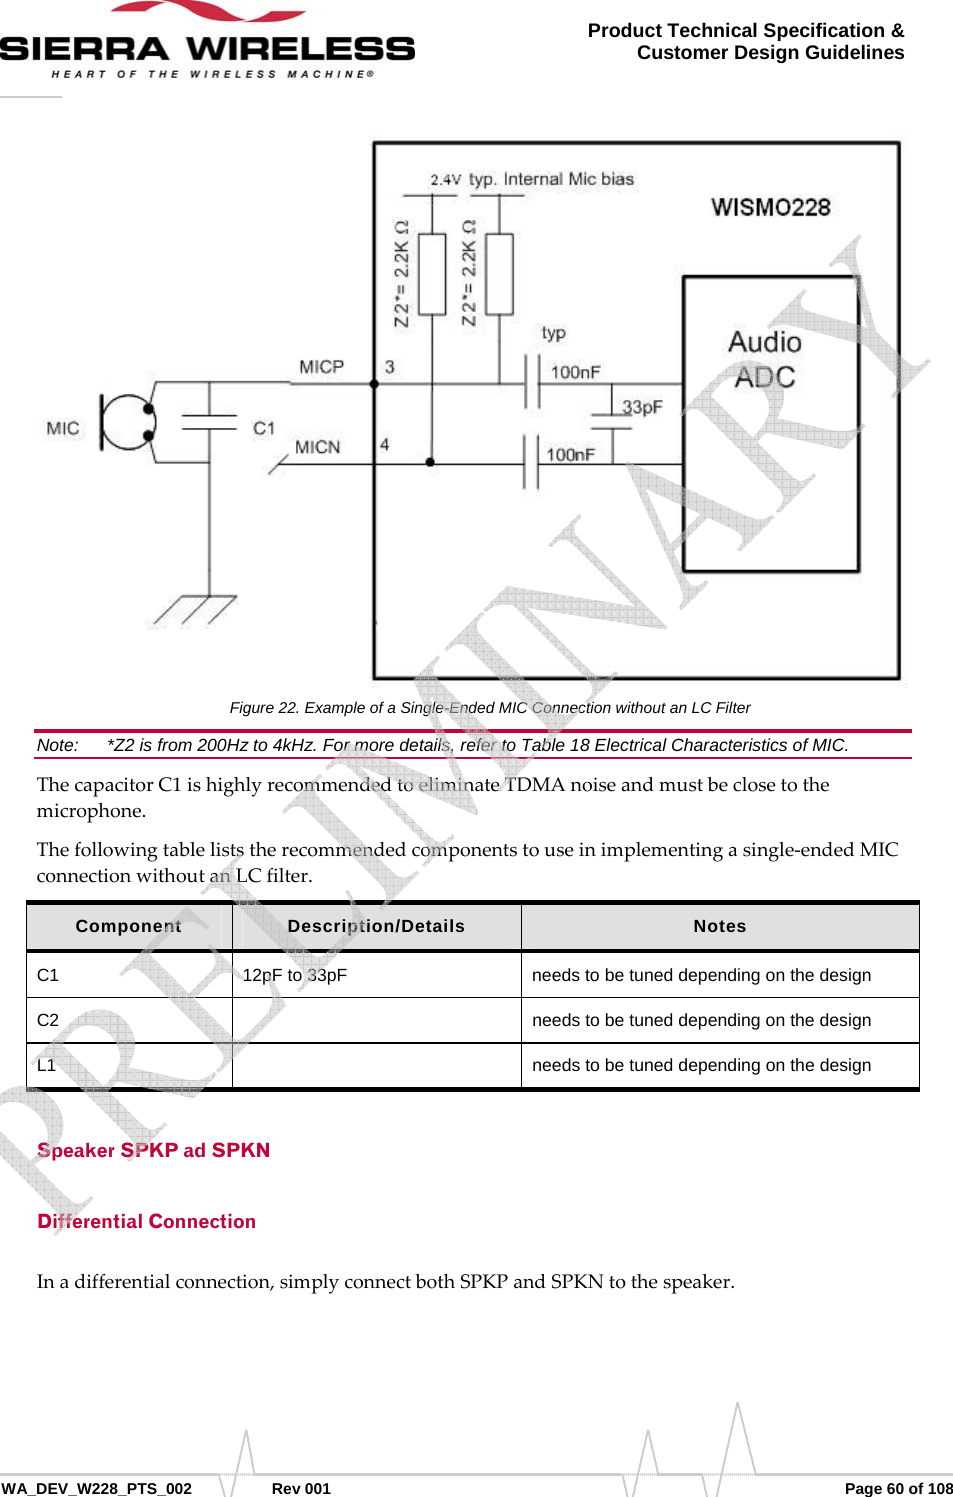      WA_DEV_W228_PTS_002 Rev 001  Page 60 of 108 Product Technical Specification &amp; Customer Design Guidelines Figure 22. Example of a Single-Ended MIC Connection without an LC Filter Note:   *Z2 is from 200Hz to 4kHz. For more details, refer to Table 18 Electrical Characteristics of MIC. ThecapacitorC1ishighlyrecommendedtoeliminateTDMAnoiseandmustbeclosetothemicrophone.Thefollowingtableliststherecommendedcomponentstouseinimplementingasingle‐endedMICconnectionwithoutanLCfilter.Component  Description/Details  Notes C1  12pF to 33pF  needs to be tuned depending on the design C2    needs to be tuned depending on the design L1    needs to be tuned depending on the design Speaker SPKP ad SPKN Differential Connection Inadifferentialconnection,simplyconnectbothSPKPandSPKNtothespeaker.   